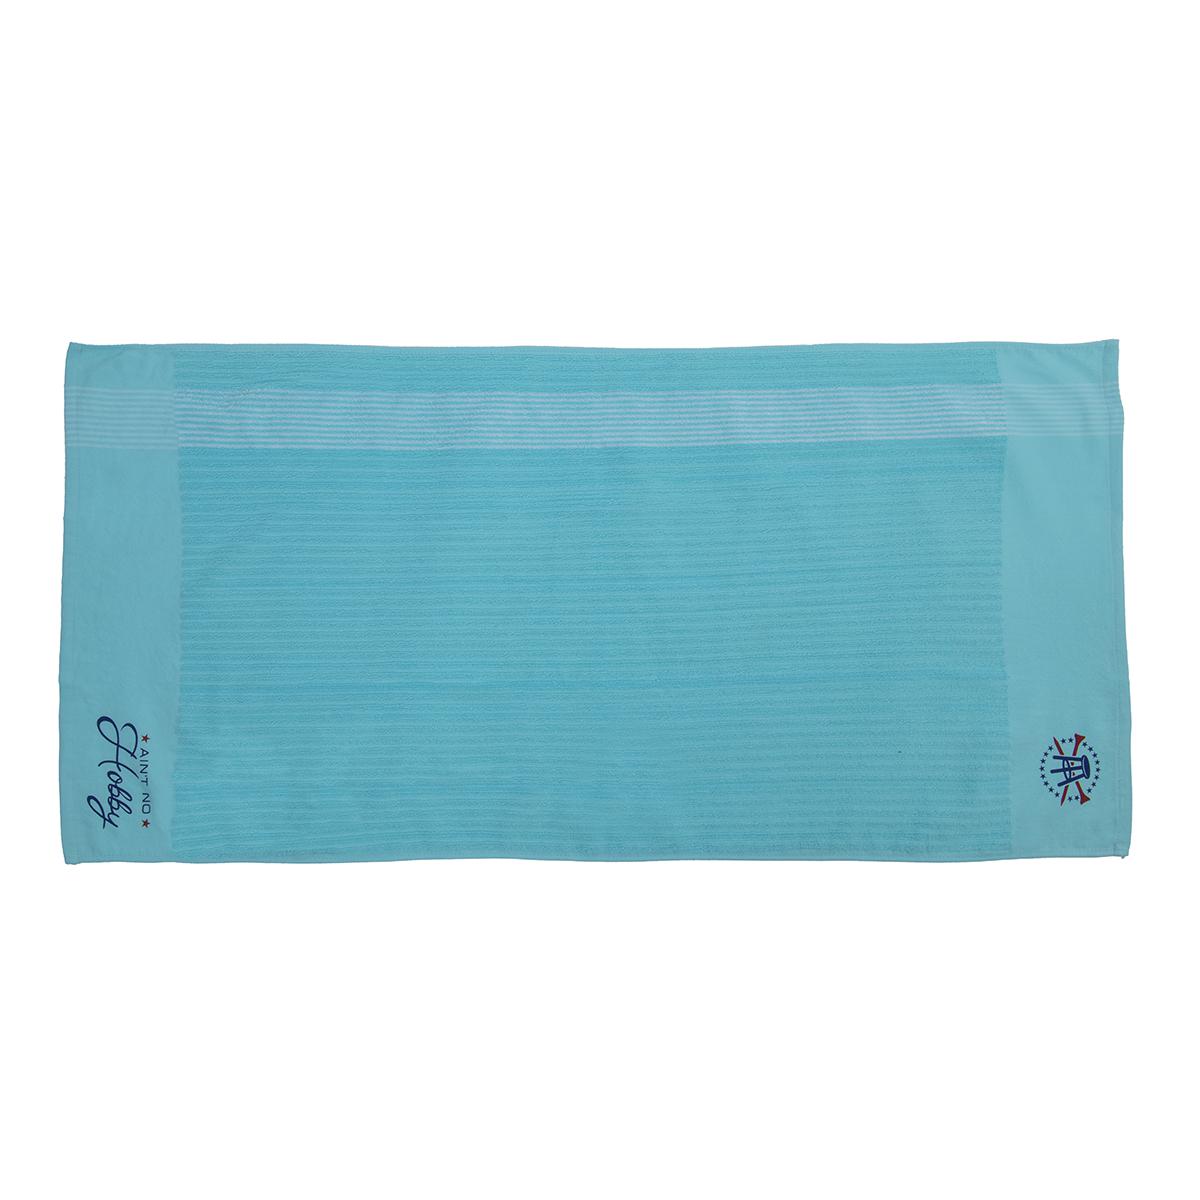 Barstool Golf Ain't No Hobby Striped Caddy Towel-Golf Accessories-Fore Play-Teal-One Size-Barstool Sports